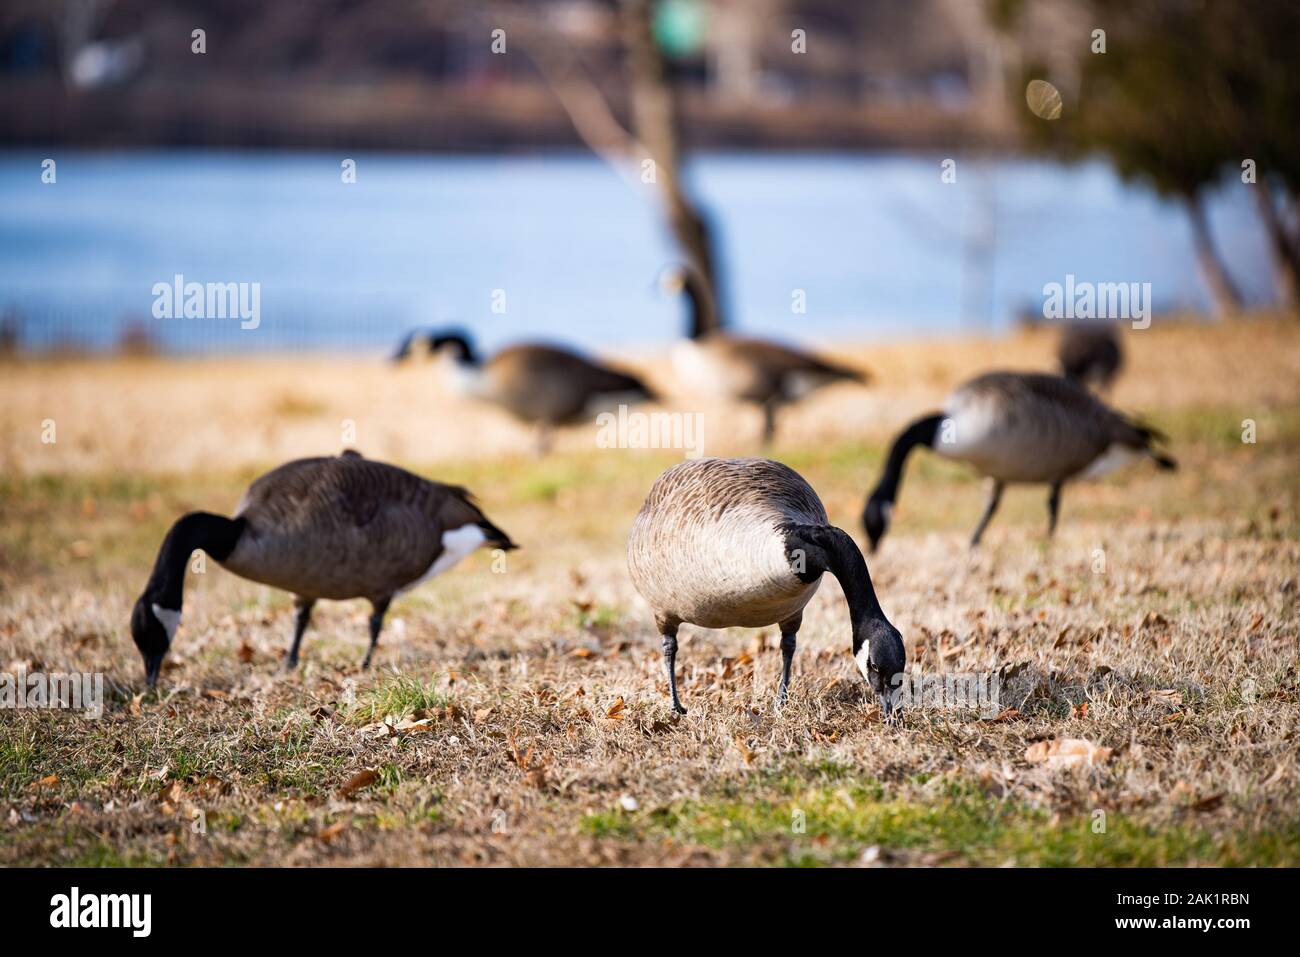 Canadian Geese graze on a wintery lawn next to Philadlephia's Schuylkill River. Stock Photo